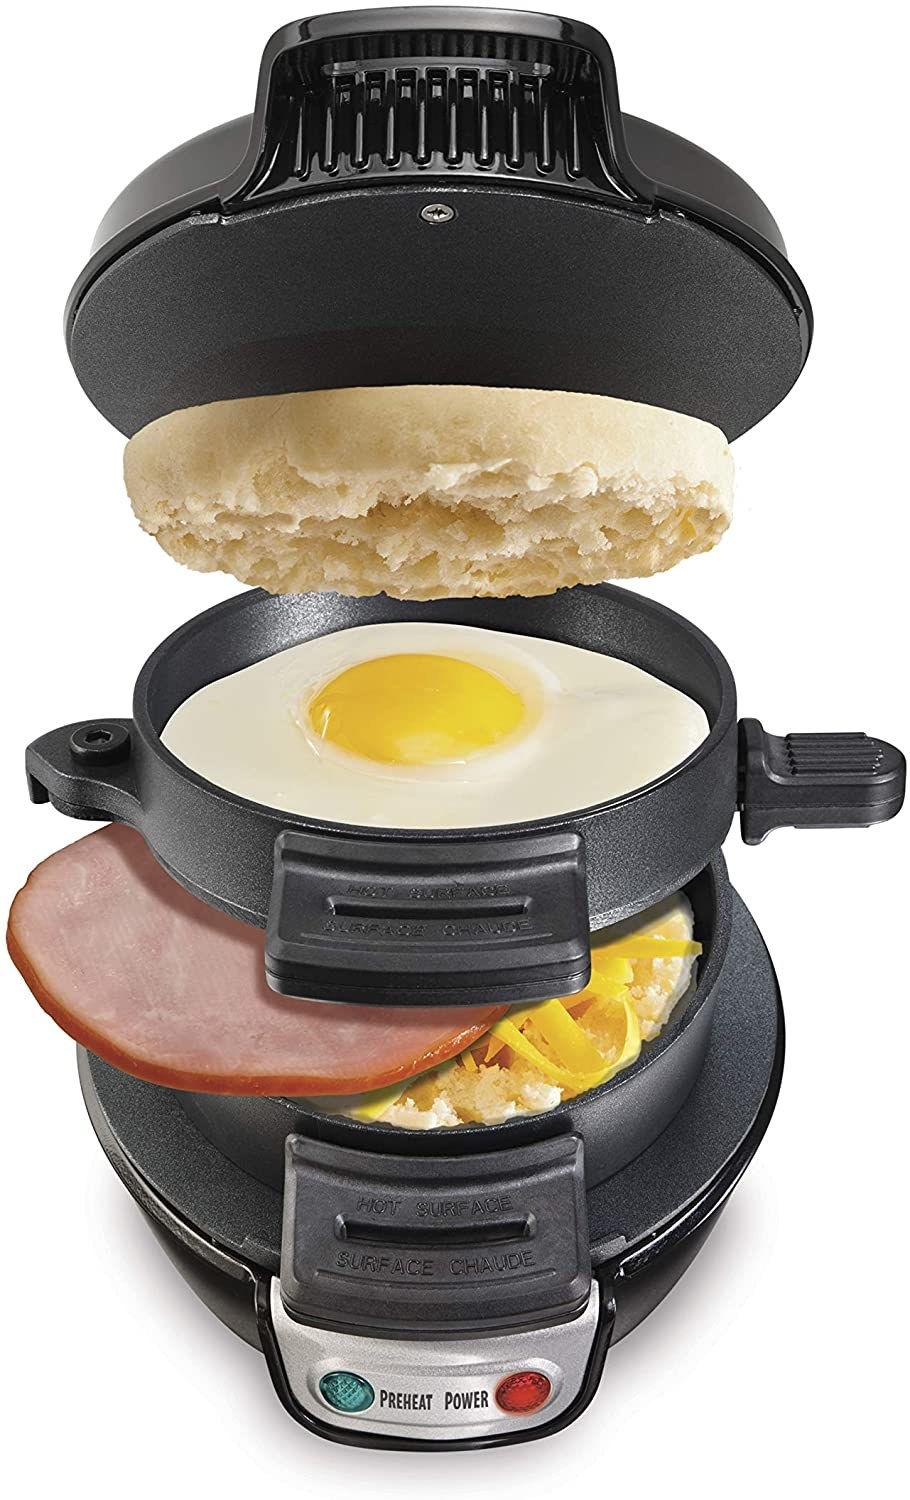 The breakfast maker with compartments for cooking and assembling eggs, ham, and English muffins